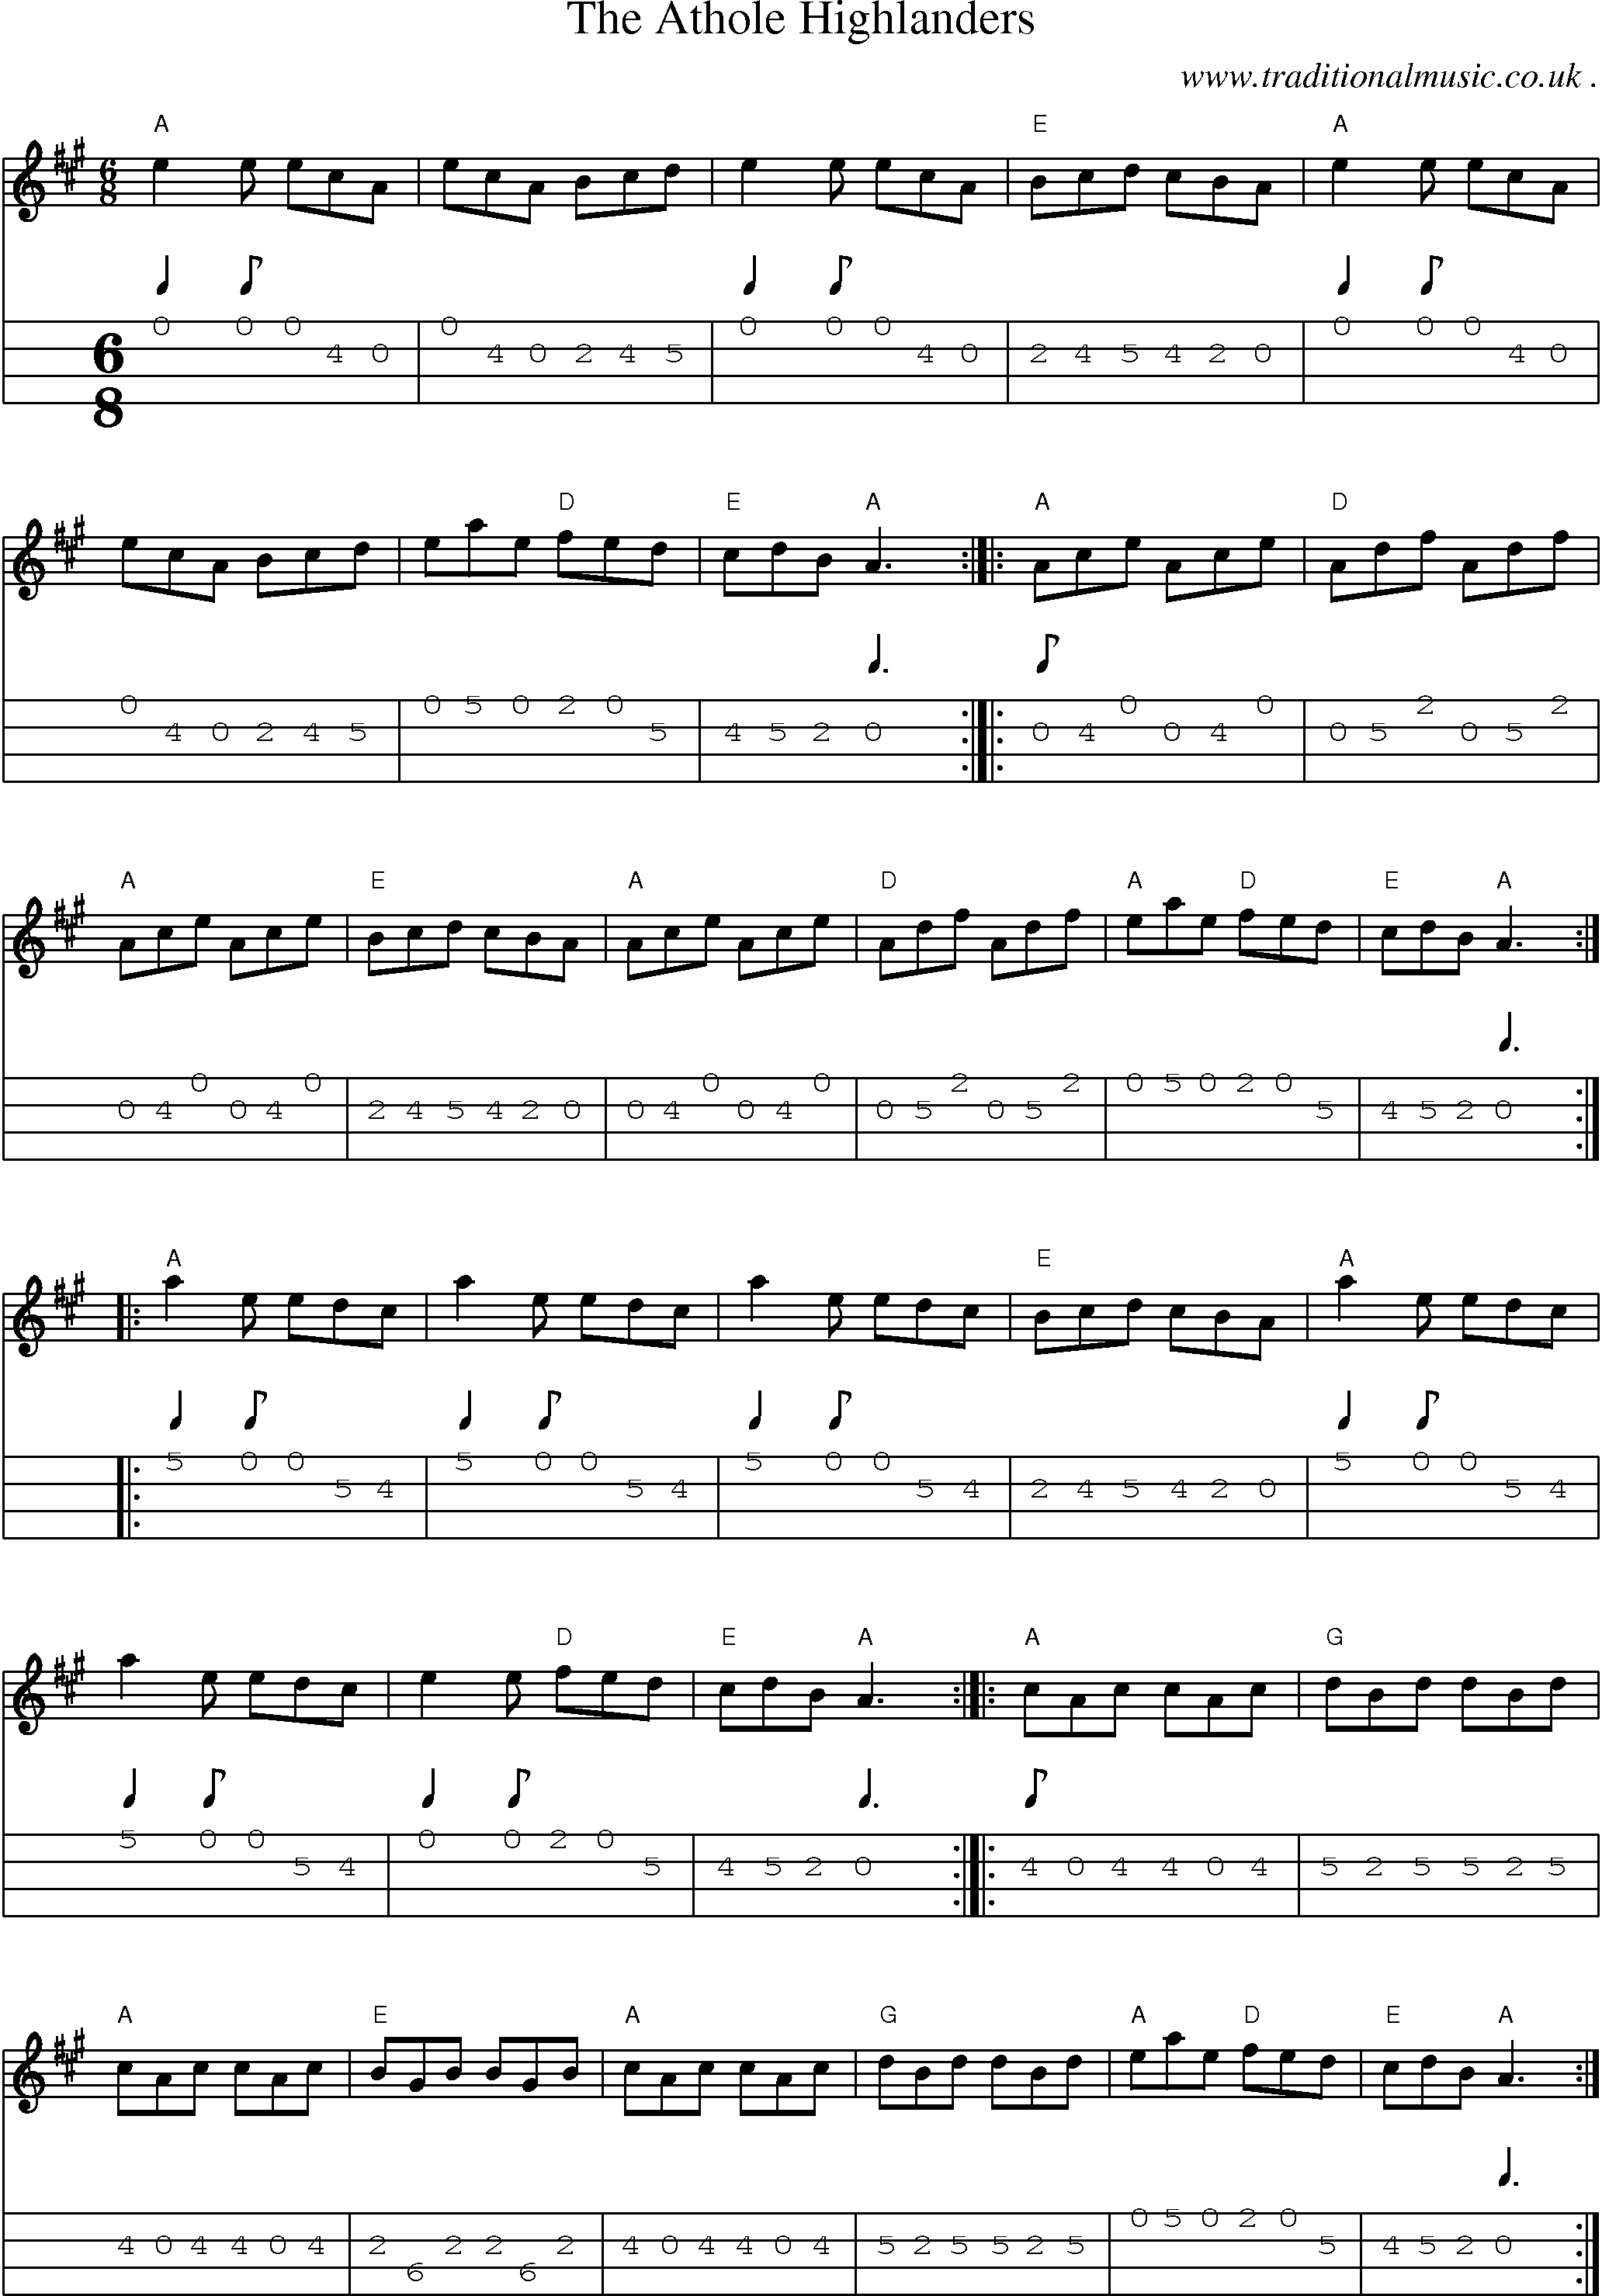 Music Score and Guitar Tabs for The Athole Highlanders